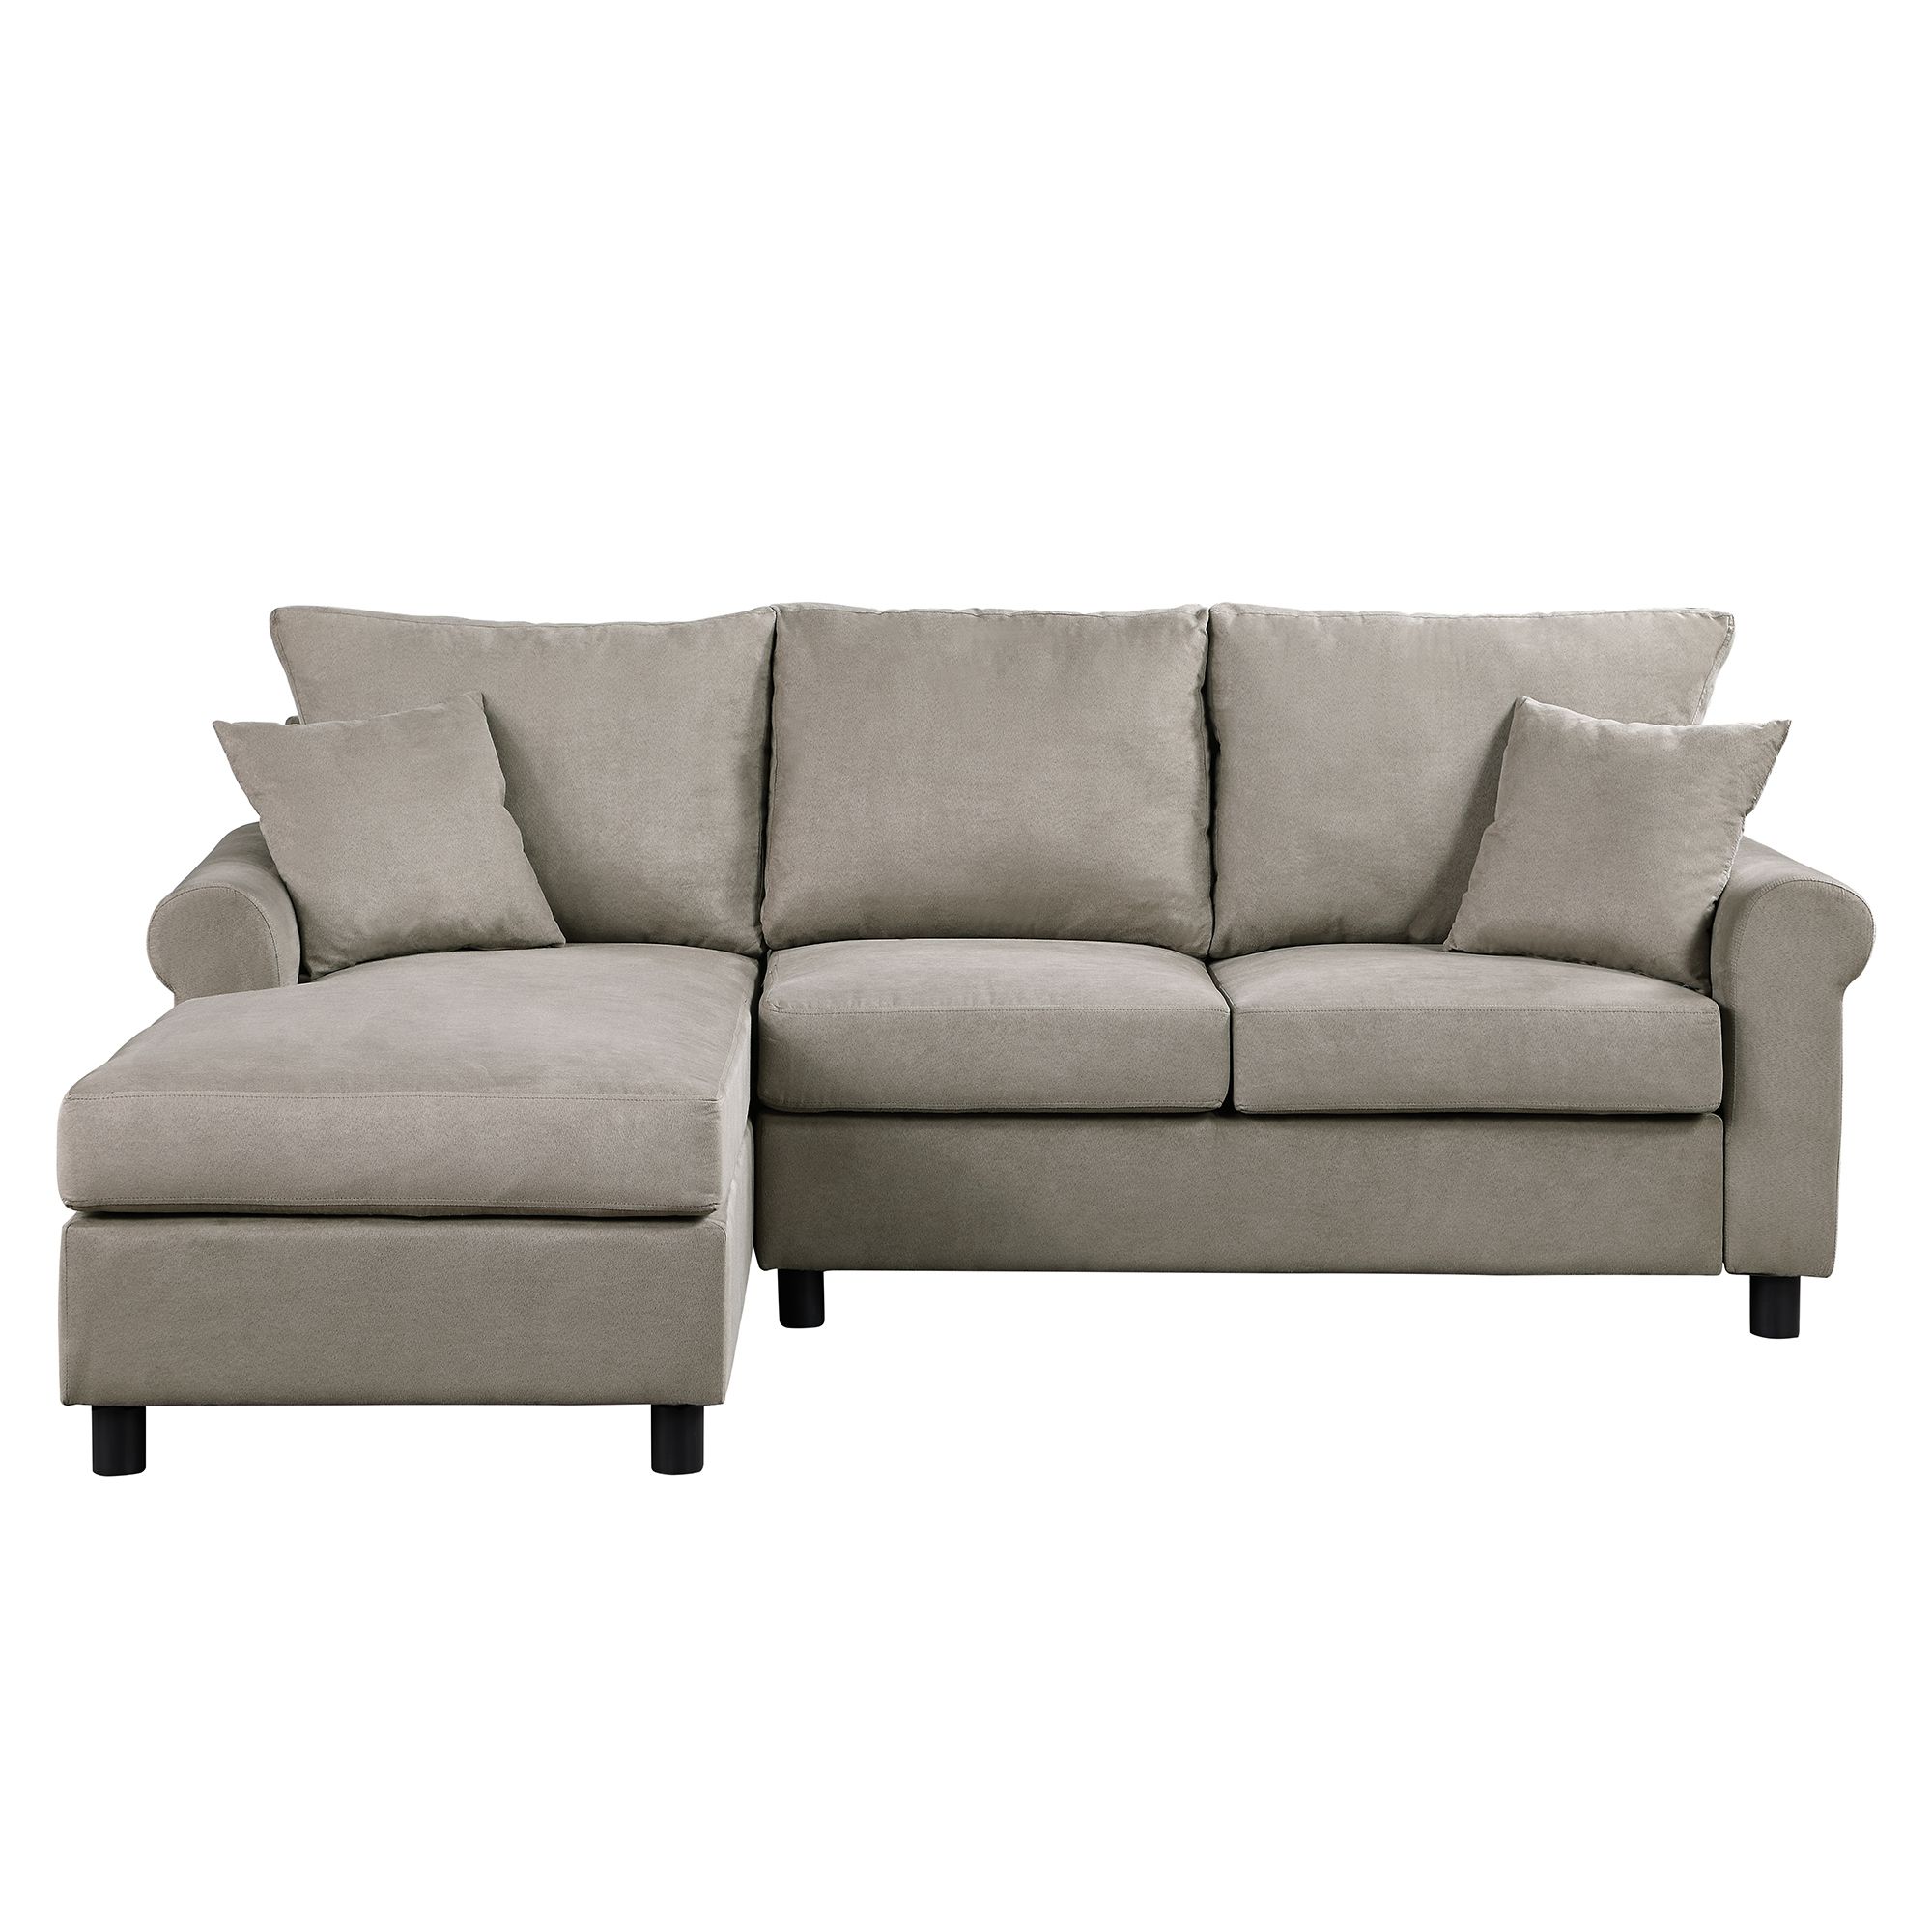 Sectional Sofa, Segmart 35'' X 85'' X 61'' Tufted For Clifton Reversible Sectional Sofas With Pillows (View 4 of 15)